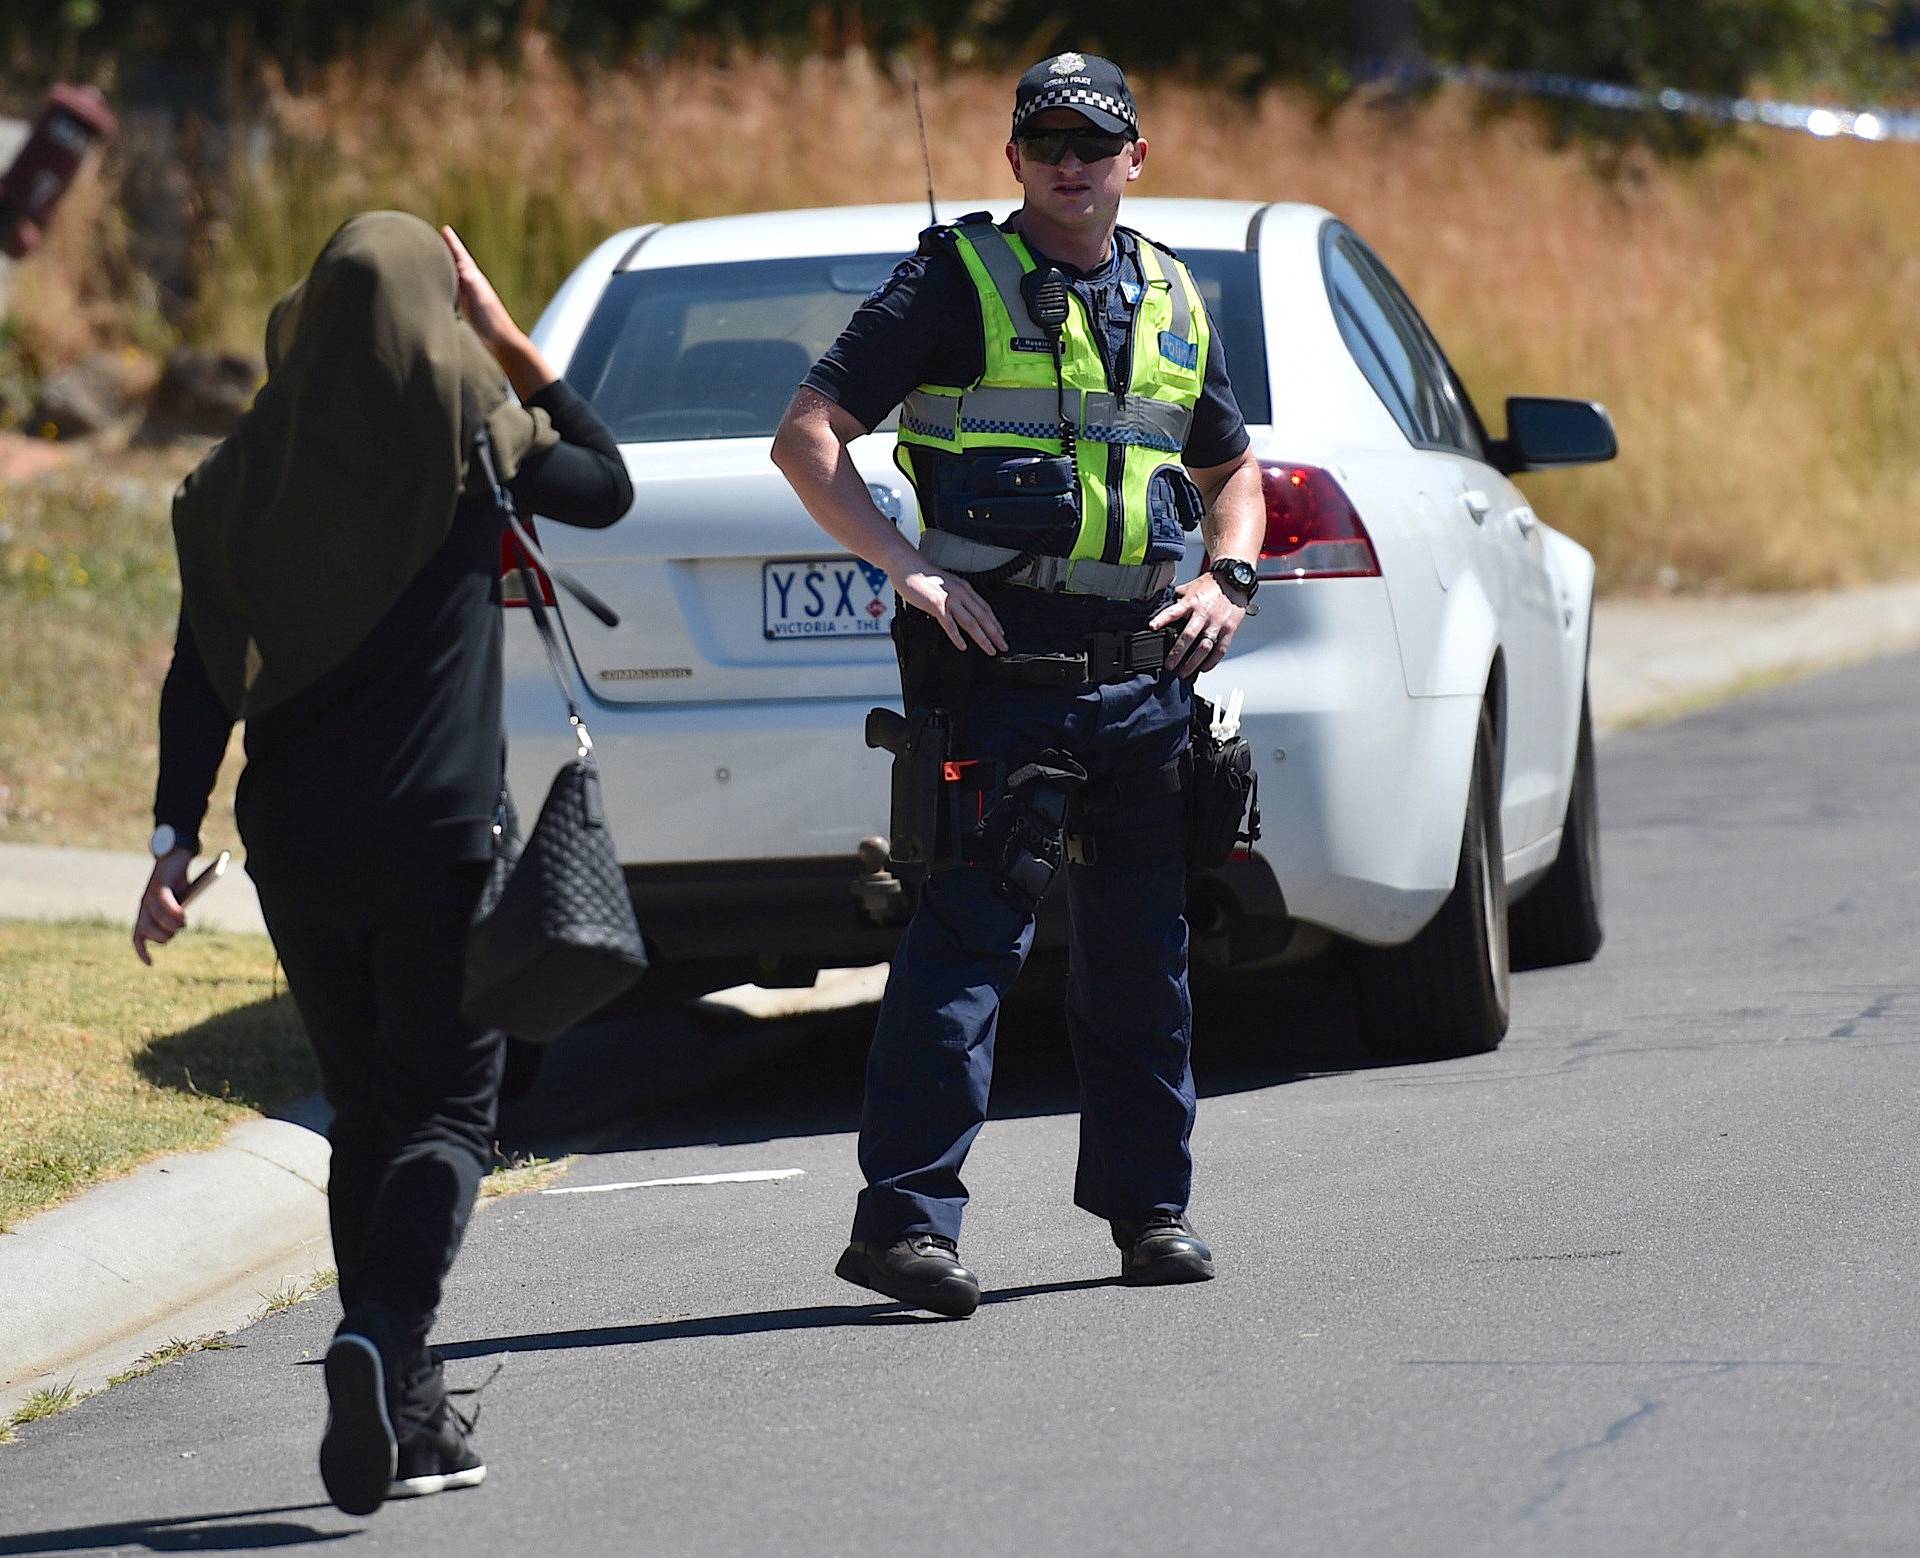 A woman approaches a policeman as he blocks the road during the search of a house in the Melbourne suburb of Meadow Heights, Australia